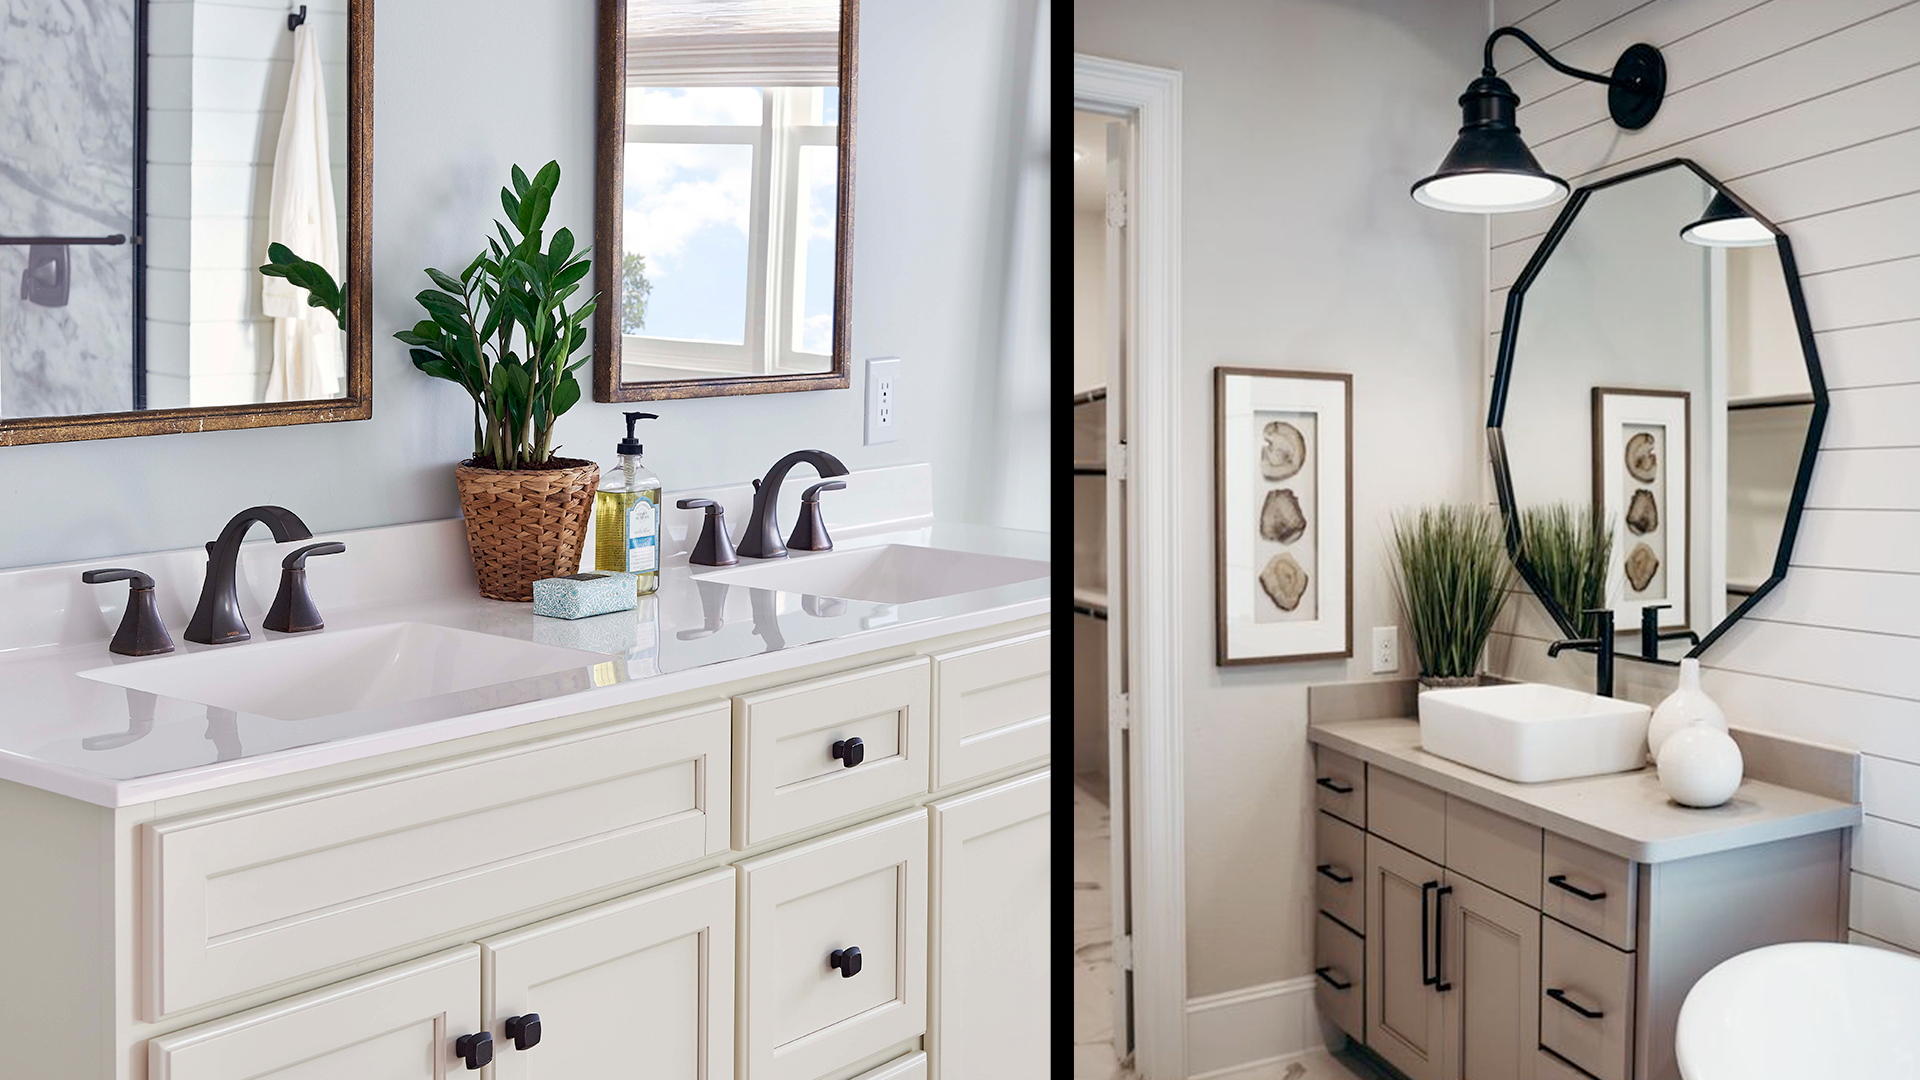 10 Questions to Ask Before Hiring a Bathroom Remodel Contractor